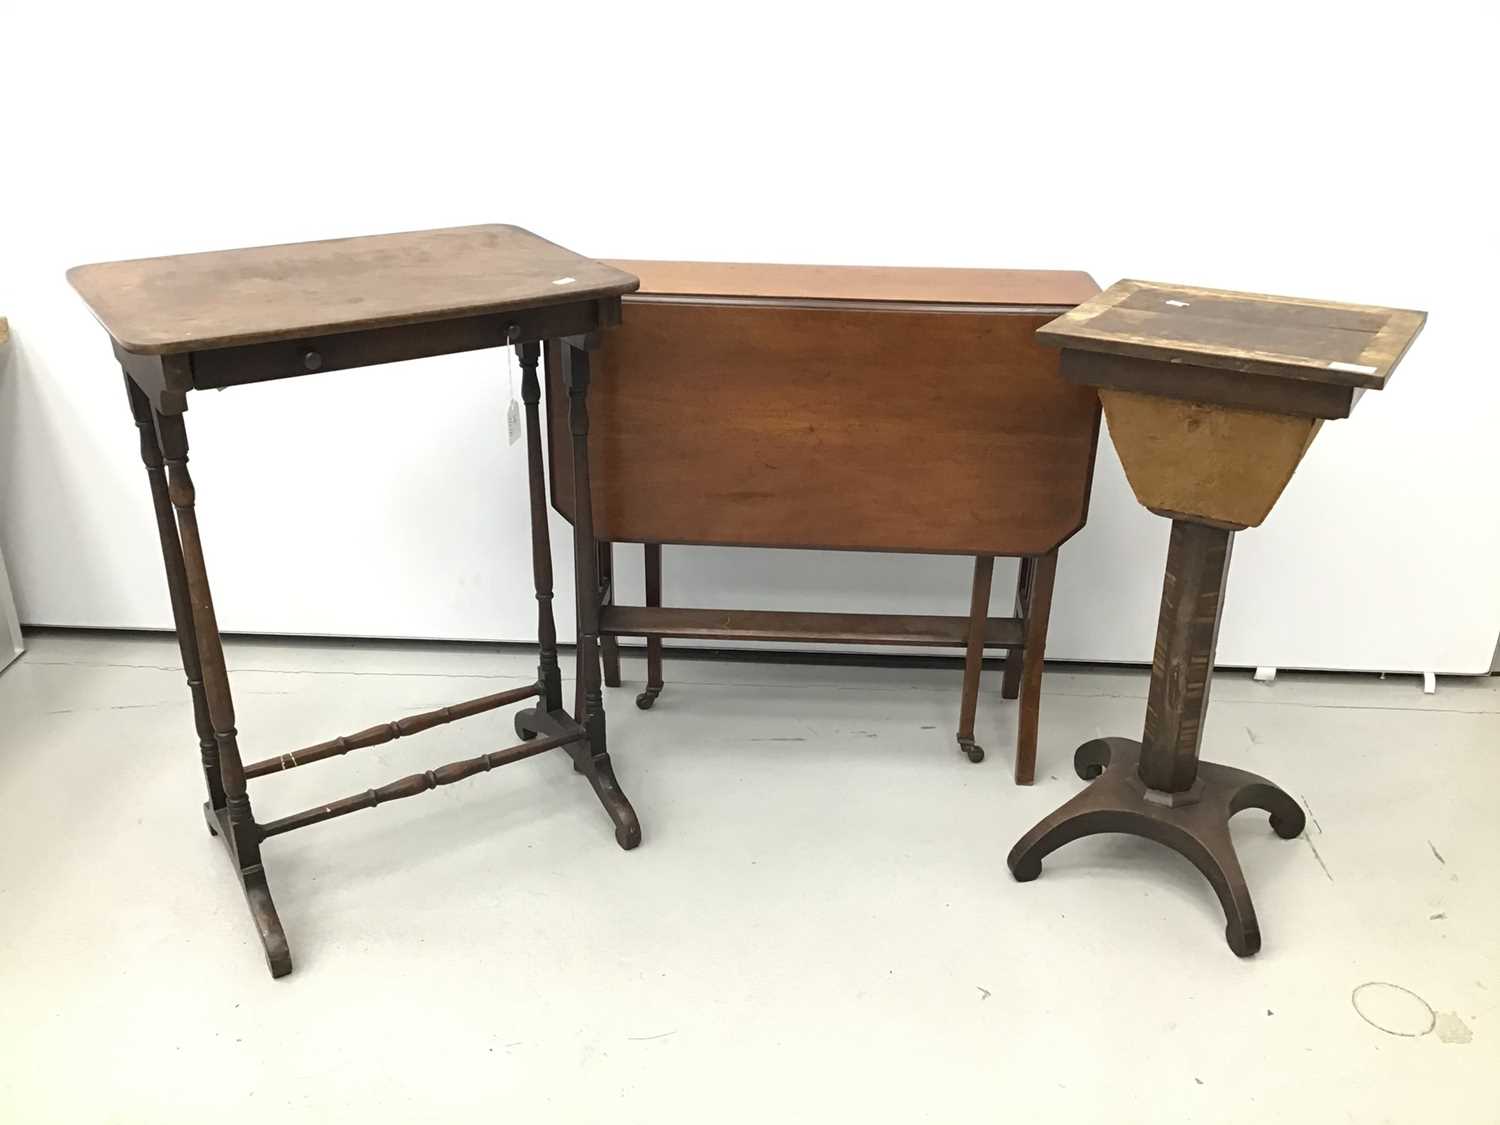 Lot 14 - Regency coromandel inlaid work table, together with a 19th century single drawer side table, spoon back chair and an early 20th century drop leaf table